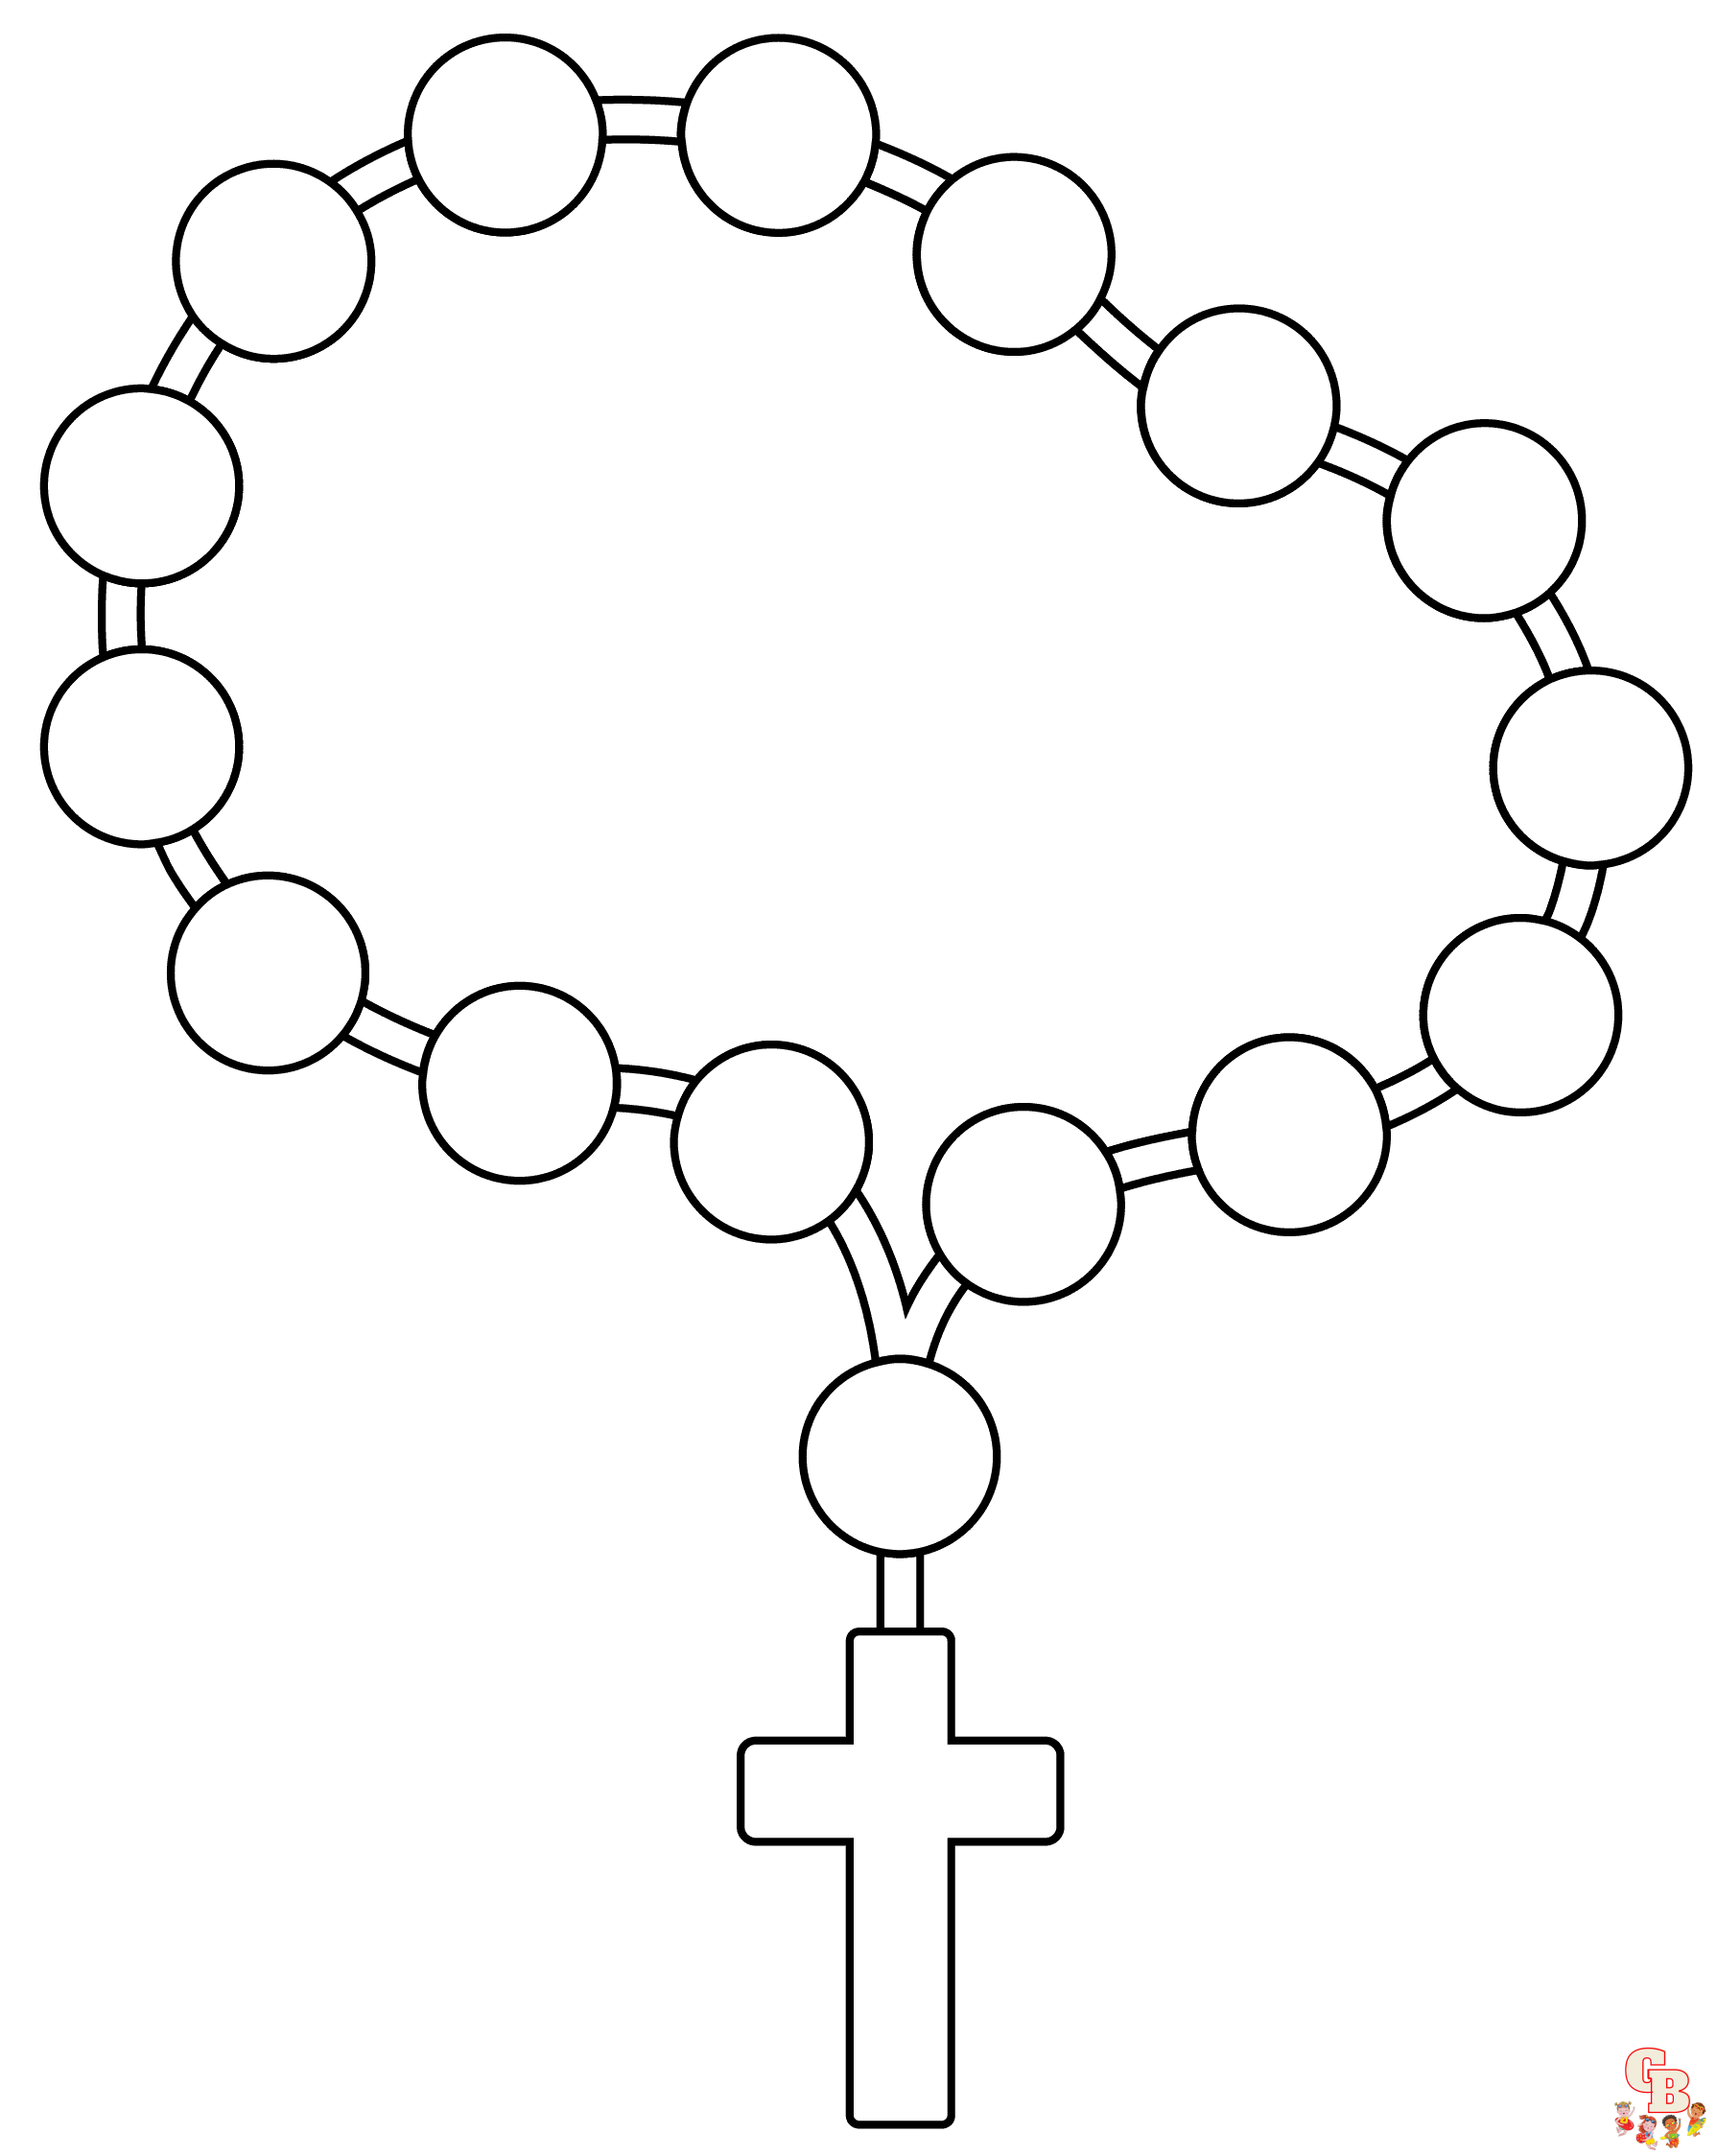 Printable rosary coloring pages free for kids and adults